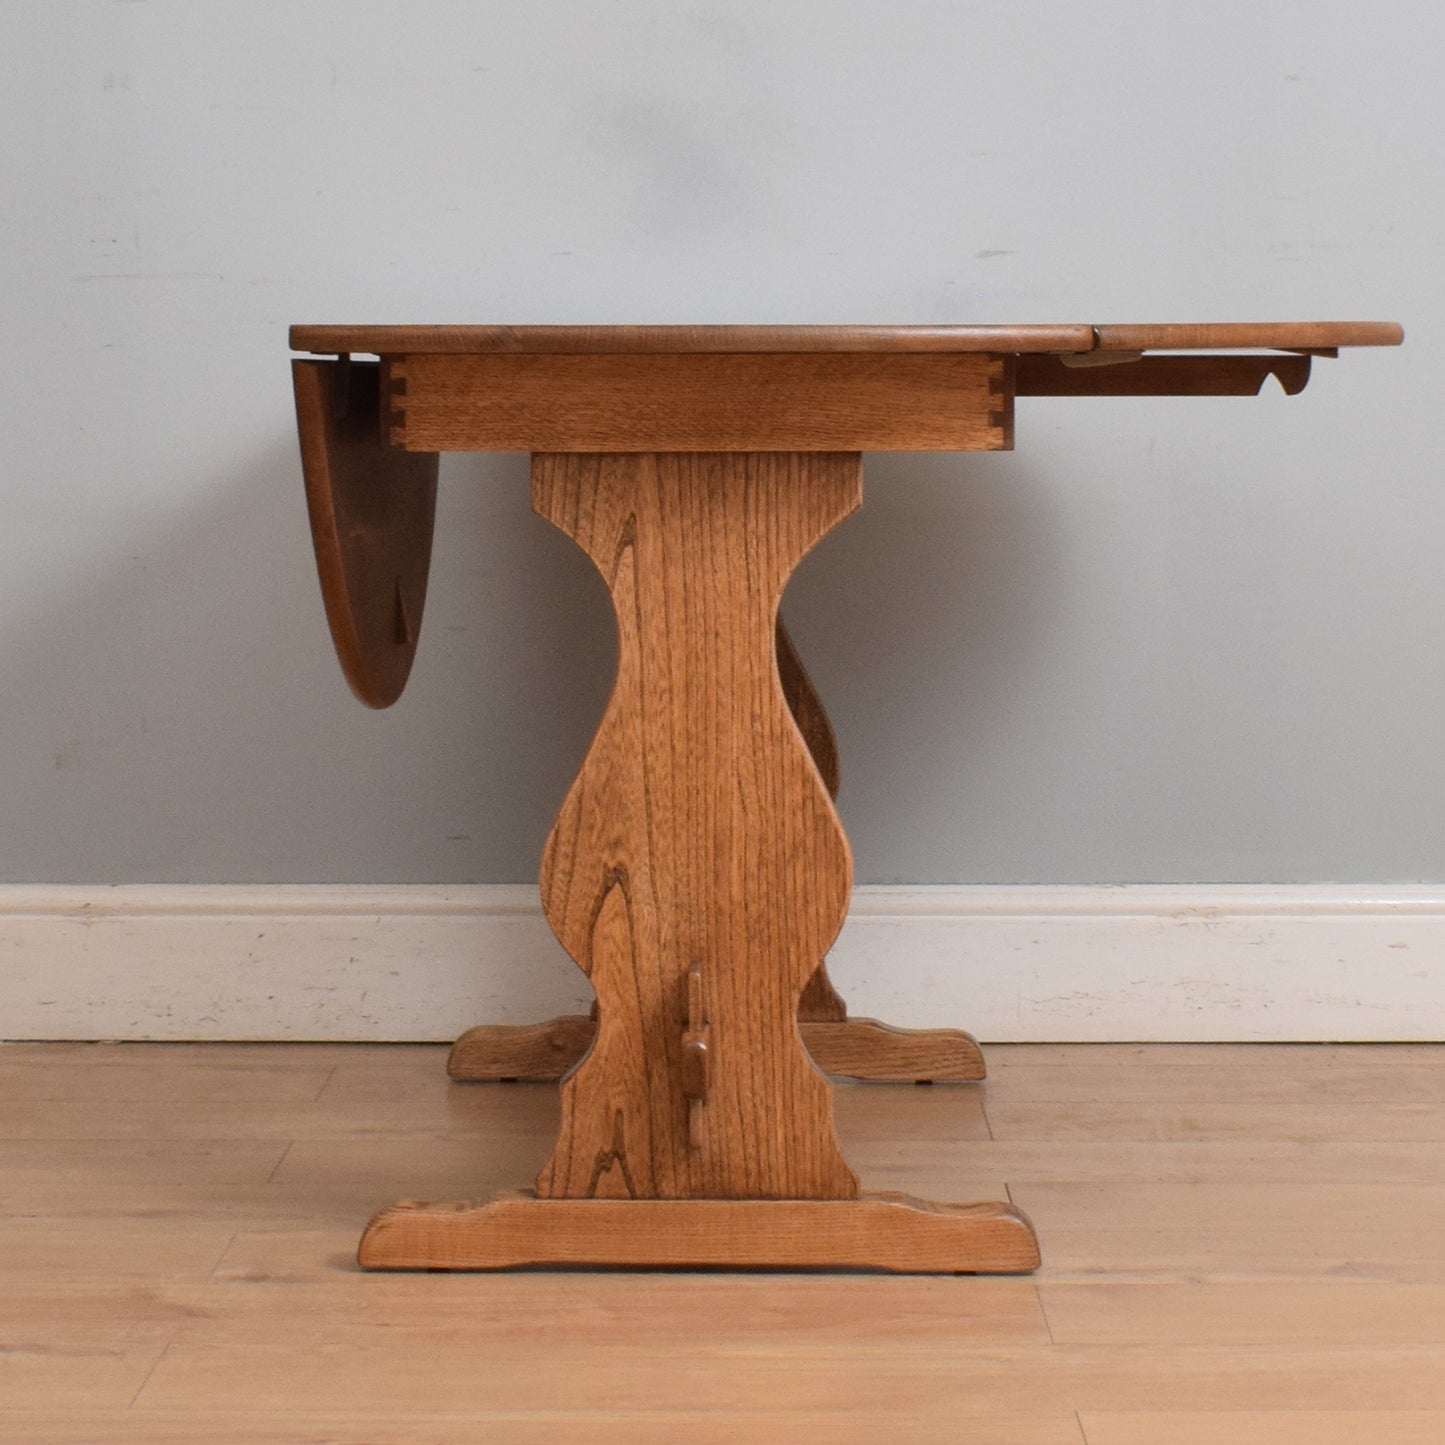 Restored Drop-Leaf Table and Four Chairs